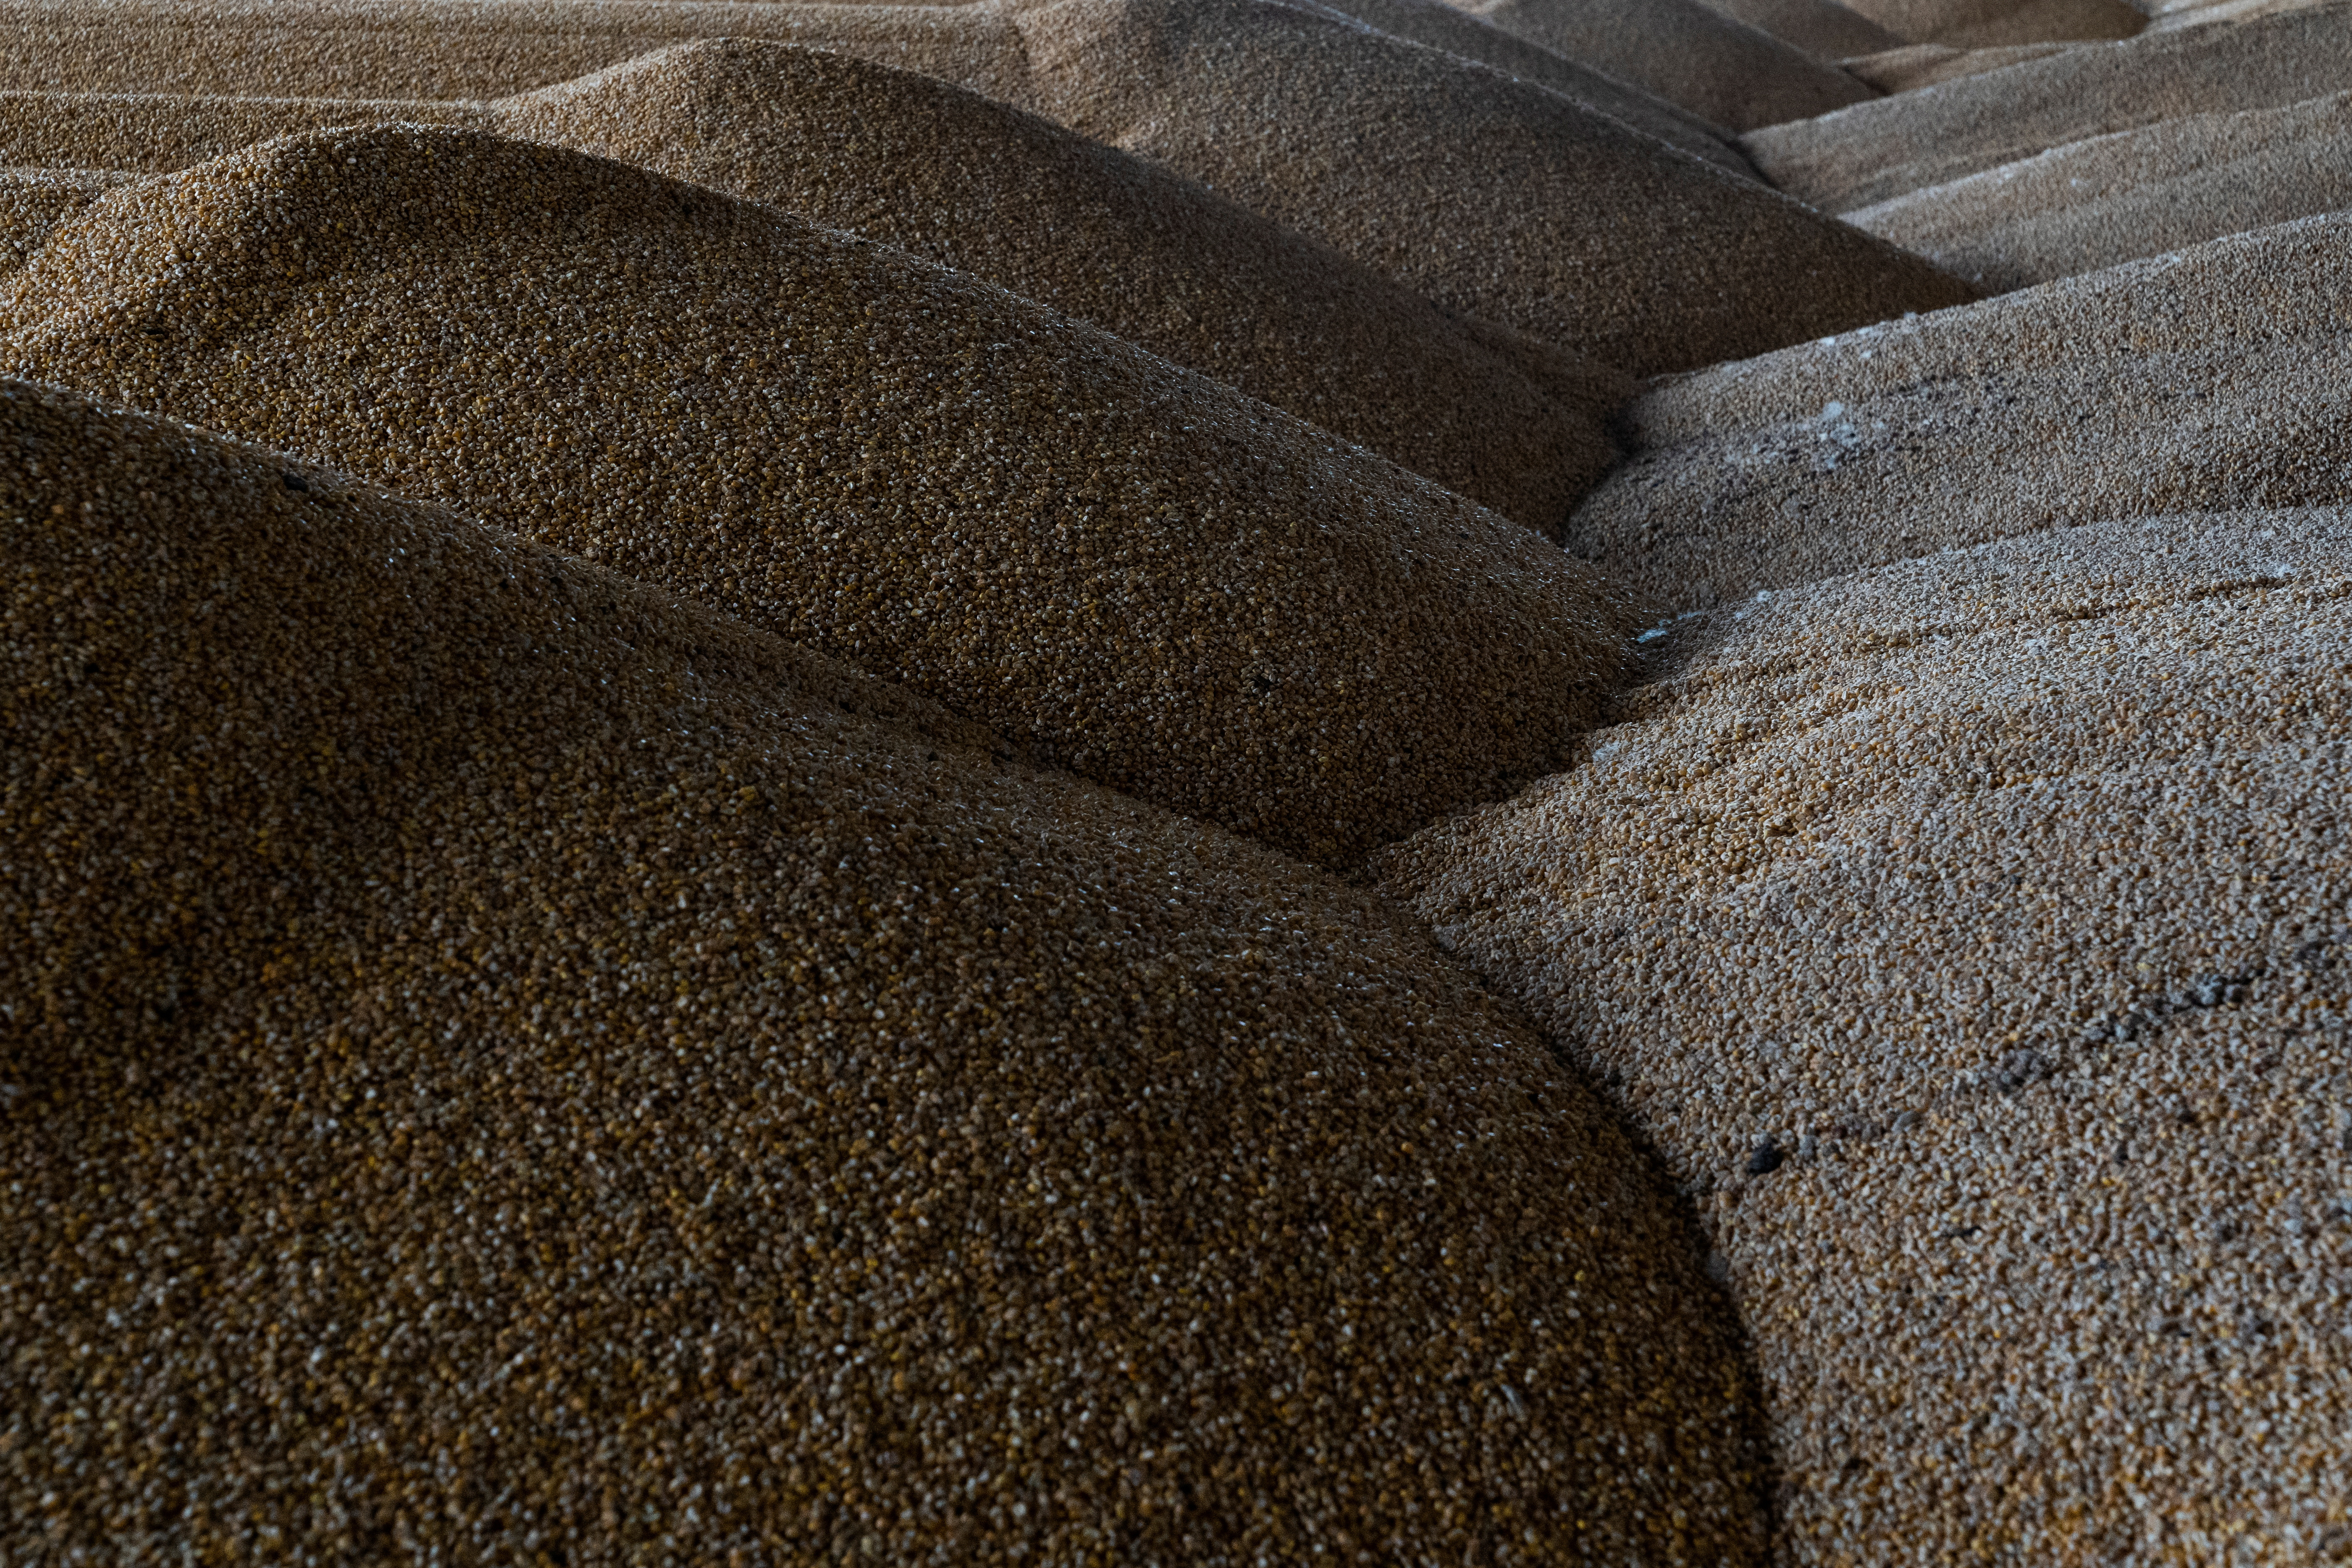 FILE PHOTO - Corn kernels are seen inside a storage at a farm in the village of Yerkivtski